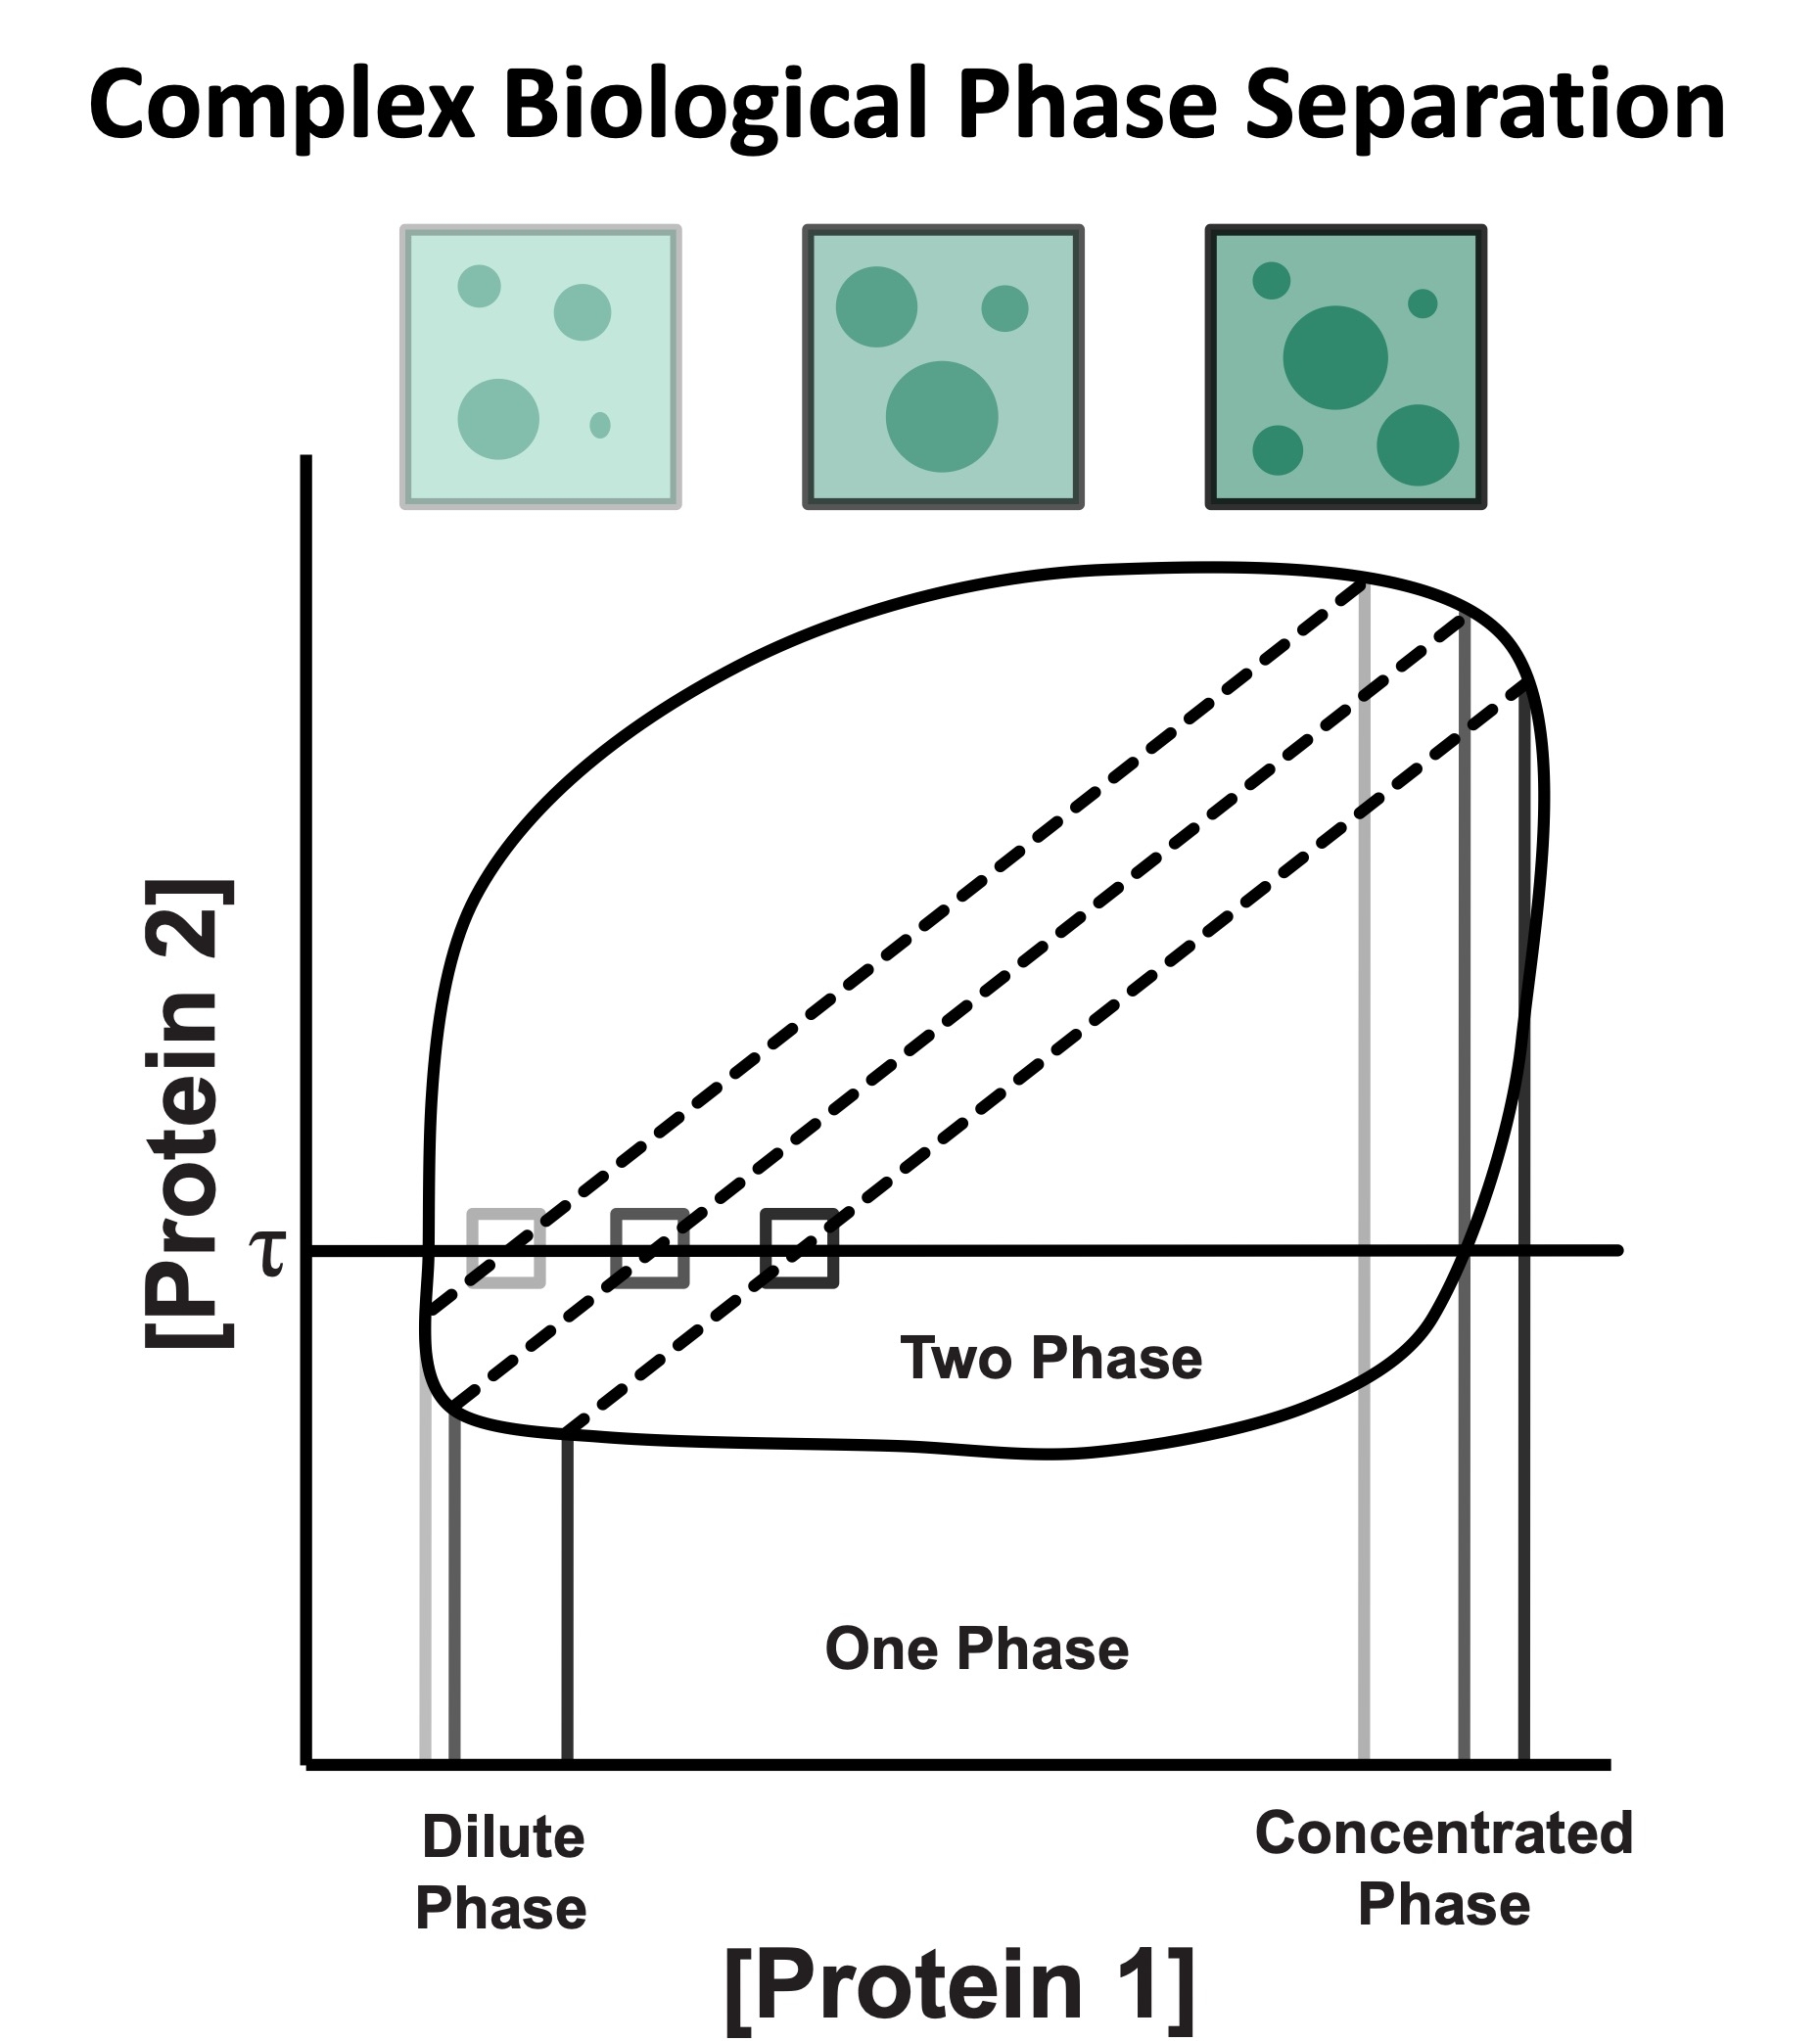 Image depicting a two phase diagram demonstrating complex biological phase separation. The x-axis represents the concentration of protein 1 while the y-axis represents the concentration of protein 2. 